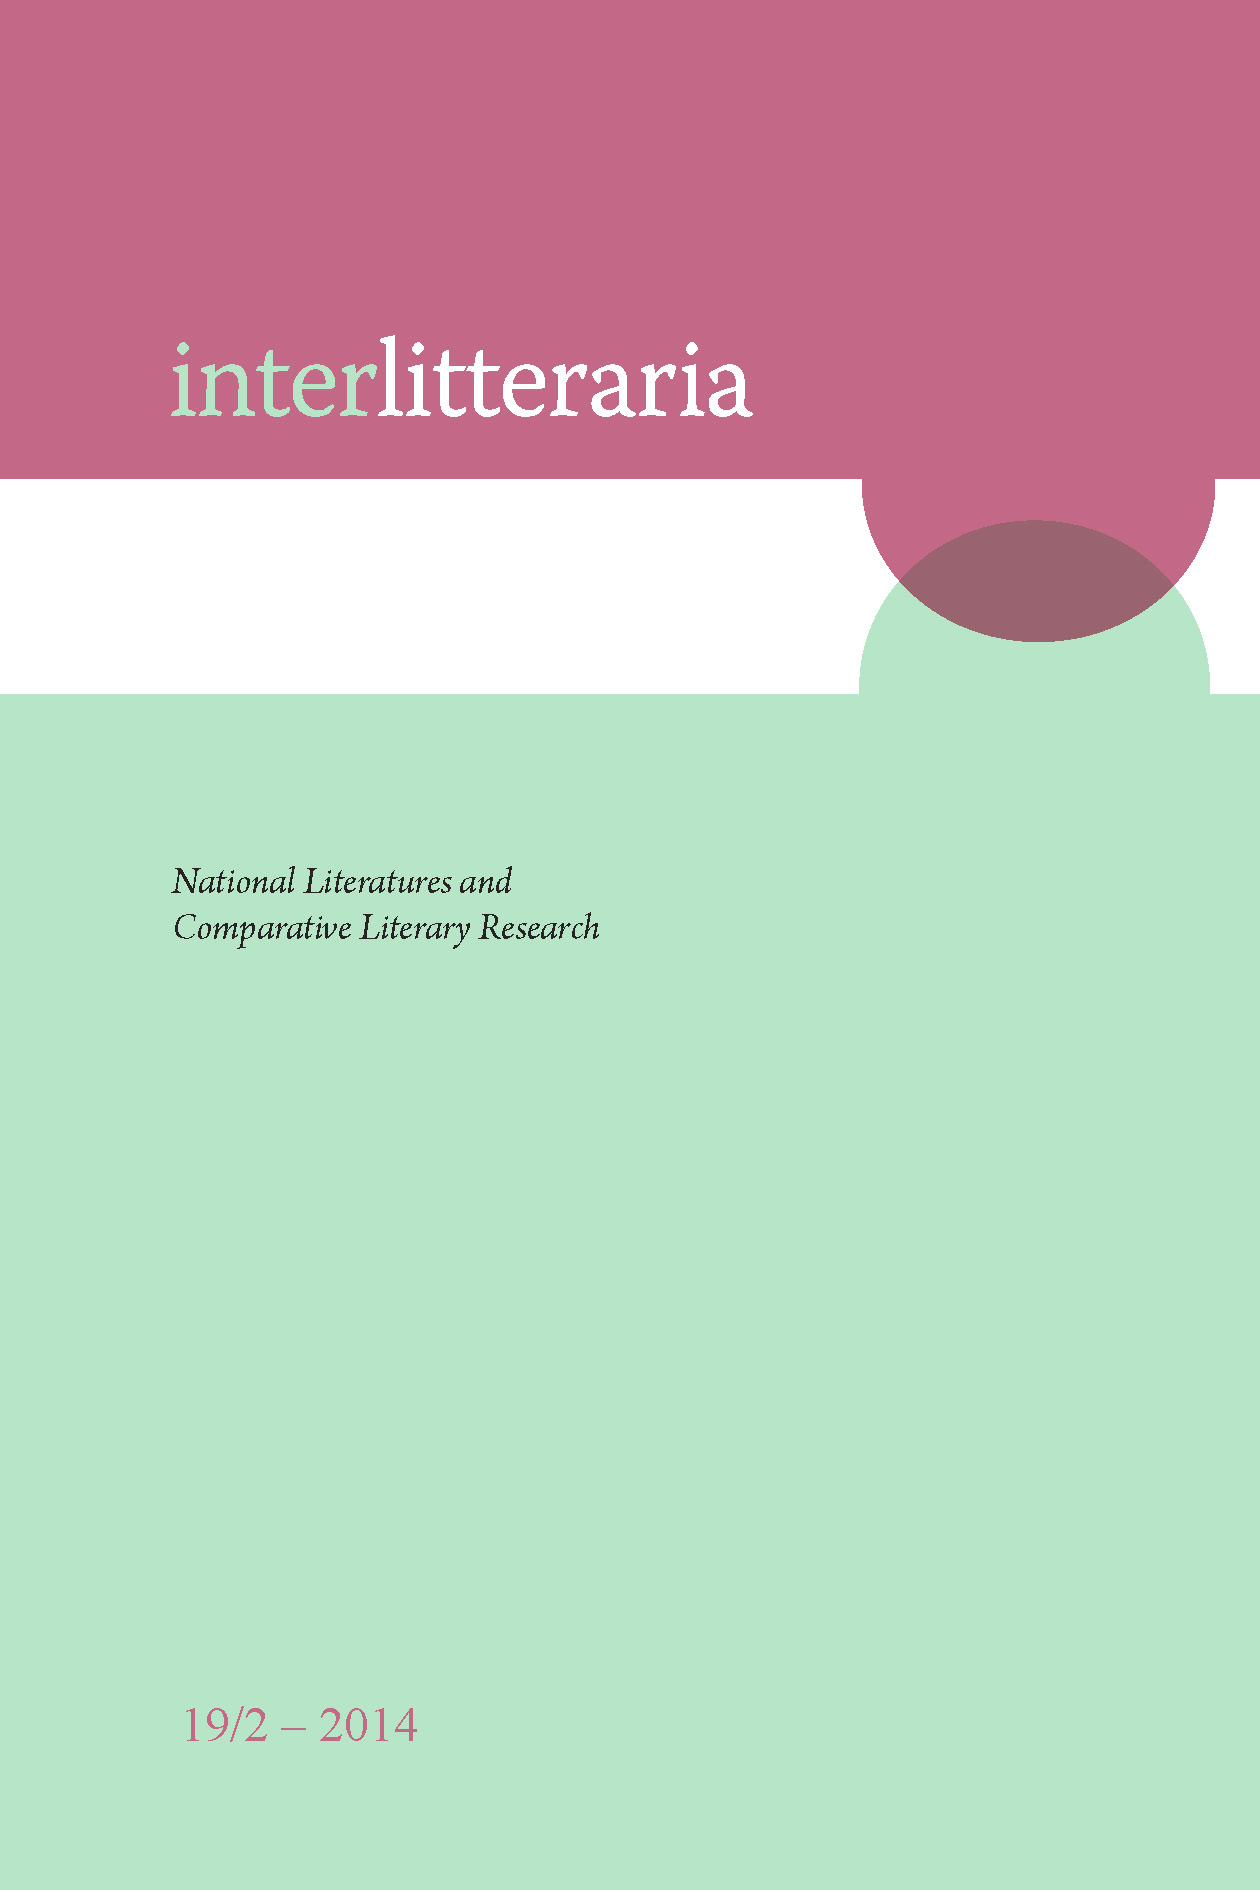 					View Vol. 19 No. 2 (2014): National Literatures and Comparative Literary Research
				